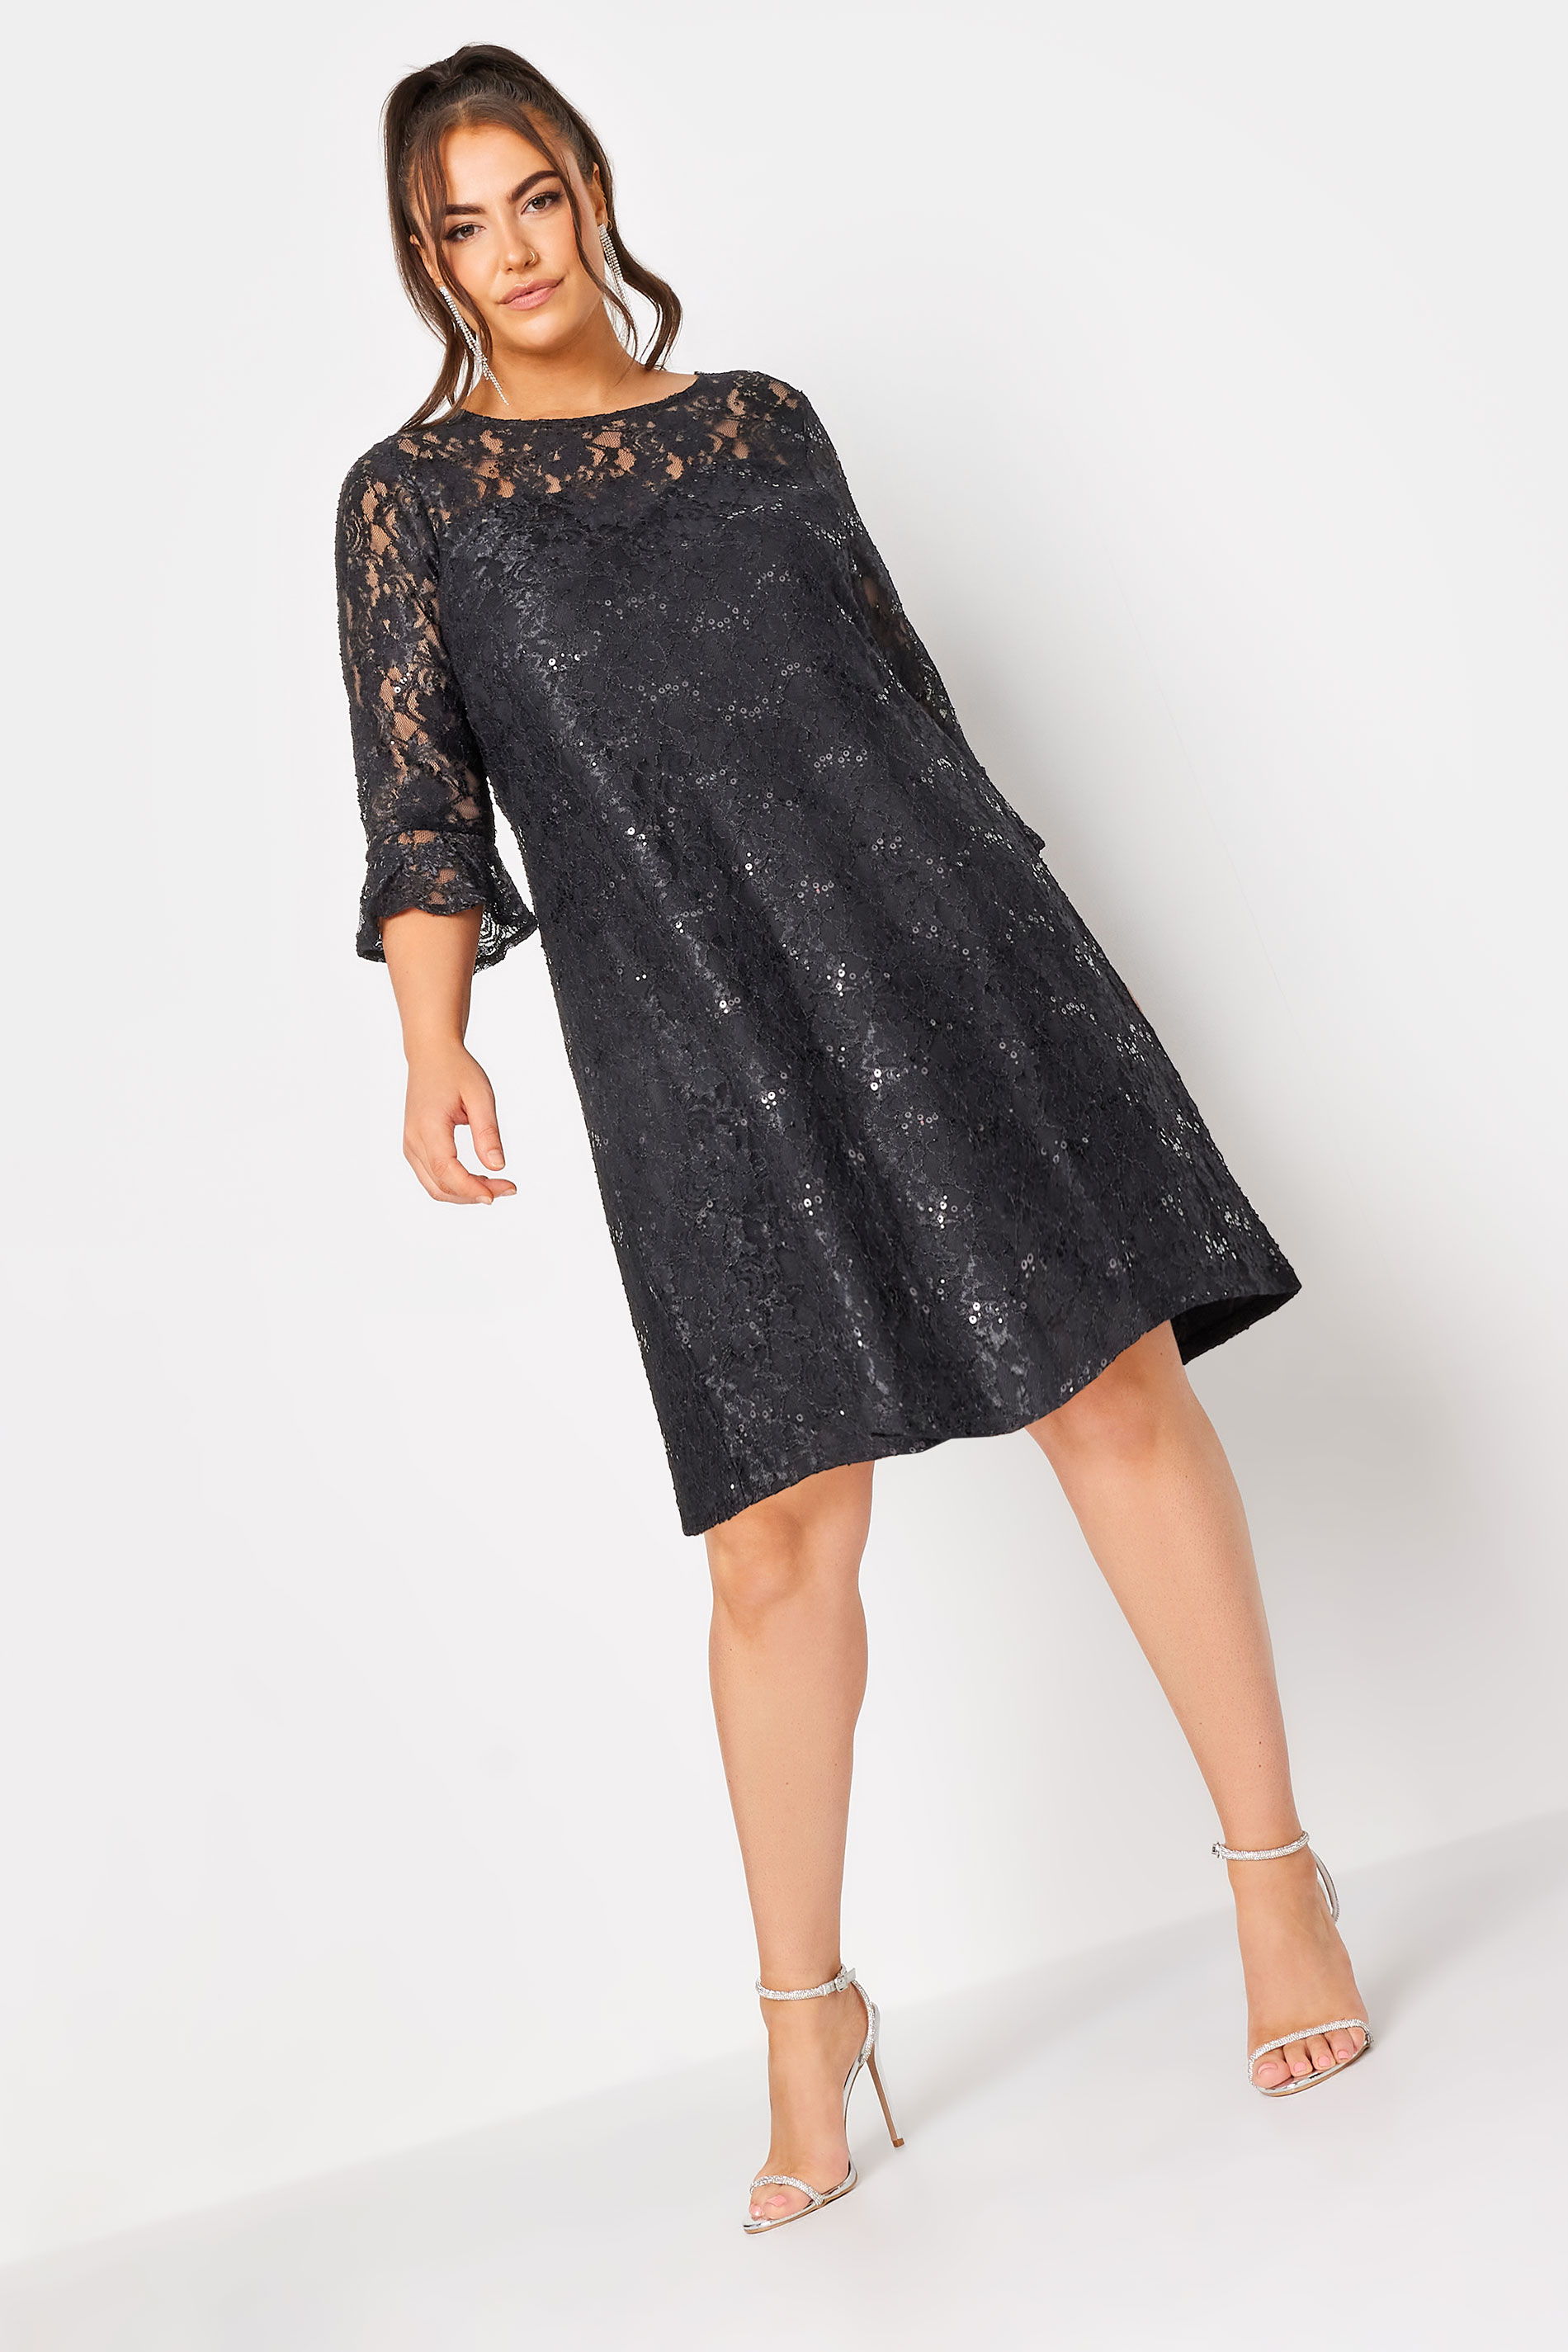 YOURS Plus Size Black Lace Sequin Embellished Swing Dress | Yours Clothing 2